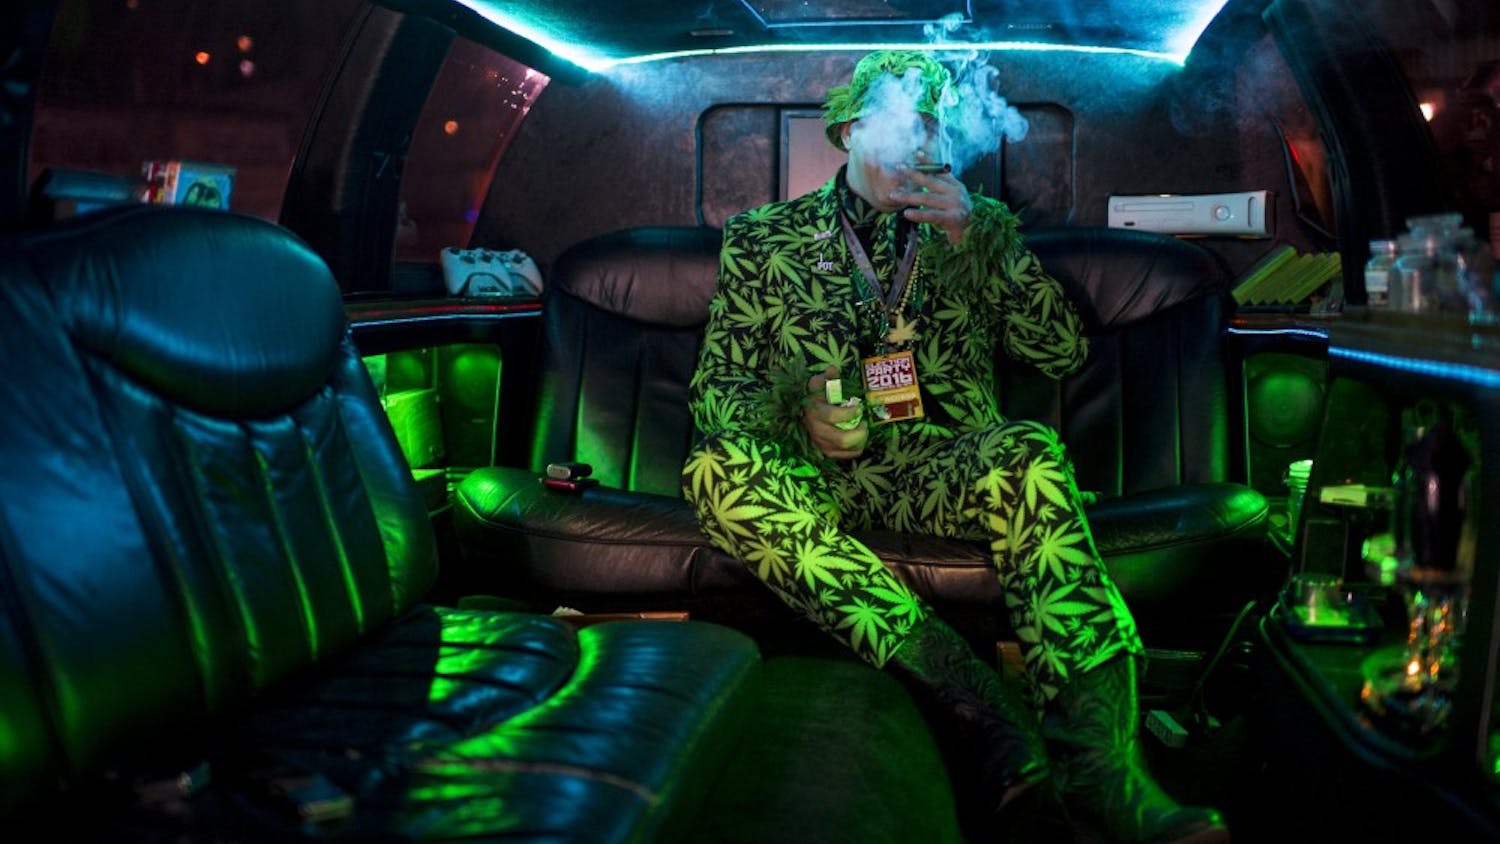 Mike Barnes takes a celebratory puff in his privately owned "420 Limo" at an election party in Oakland, Calif., after the passage of proposition 64, which legalized and taxed the recreational use of marijuana in California, in November 2016. (Andrew Seng/Sacramento Bee/Zuma Press/TNS)